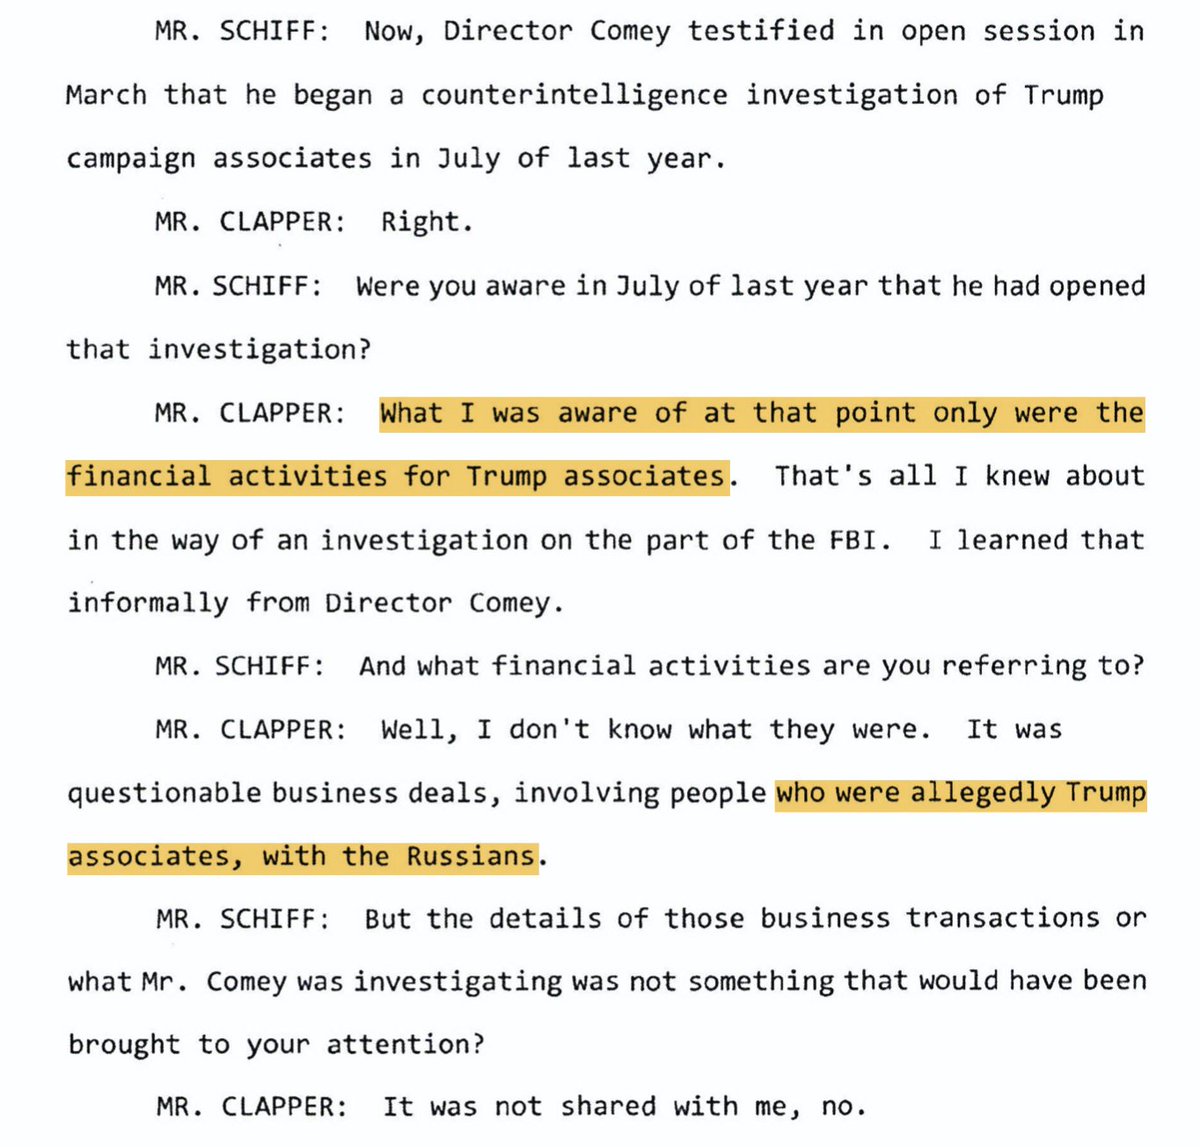 SCHIFF: OMG you remember Comey's testimony in March 2017 when Nunes almost cried?CLAPPER: Epic!SCHIFF: Did you know about Crossfire Hurricane?CLAPPER: Just the money part, OMG what losers. Hey, where is Devin, tending the cows today? 